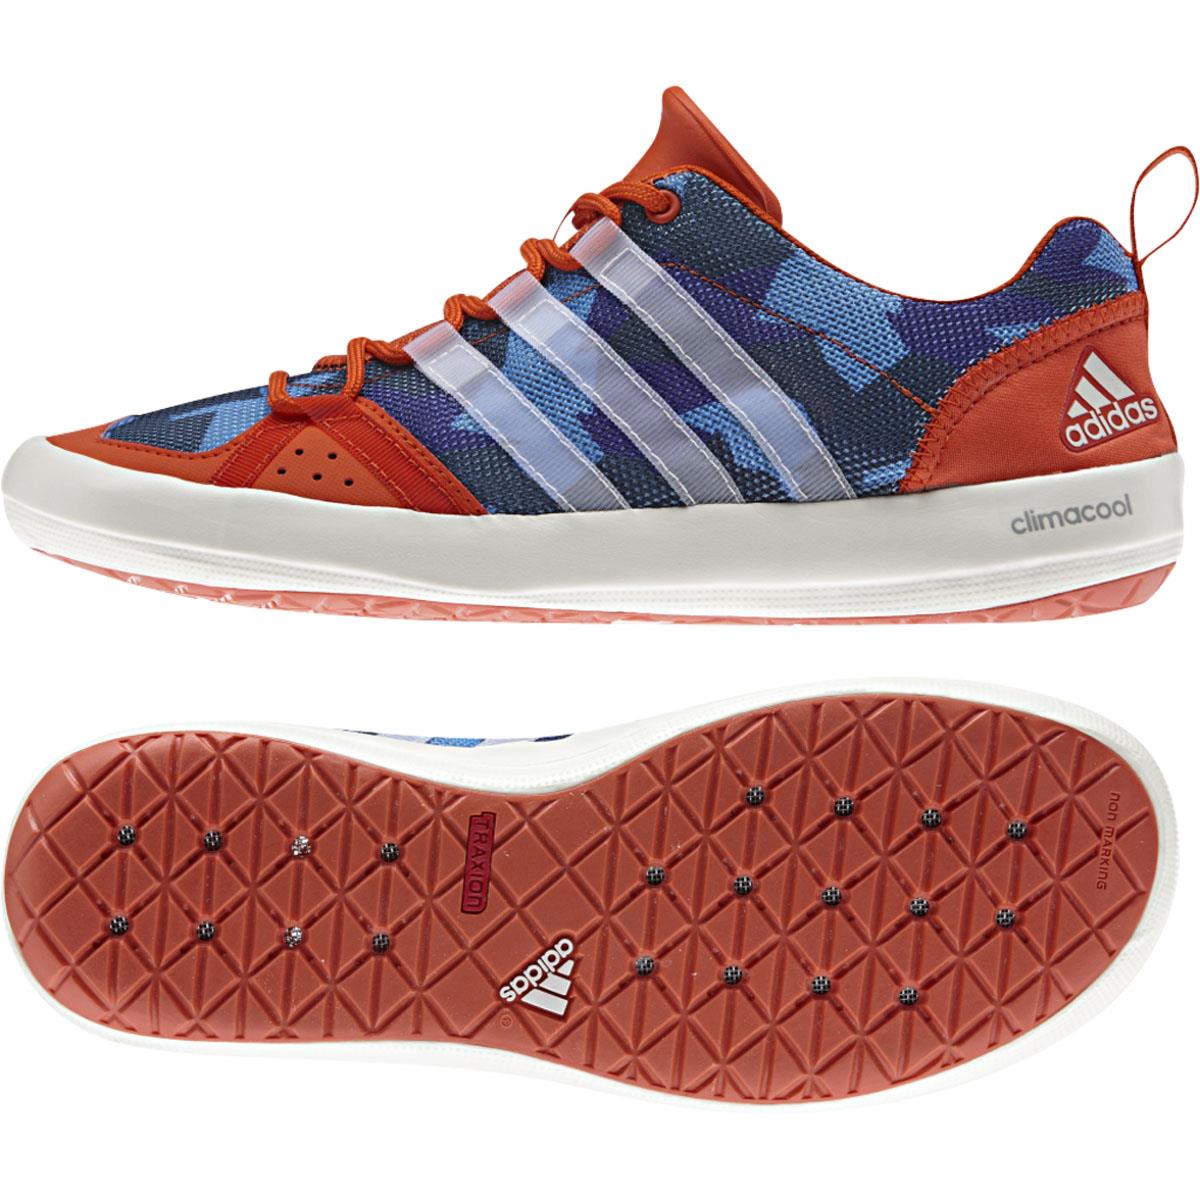 Adidas Outdoor 2015 Men's Climacool Boat Lace Graphic Water Activity Shoe   B26625 (Bold Orange/Chalk White/Col. Navy  